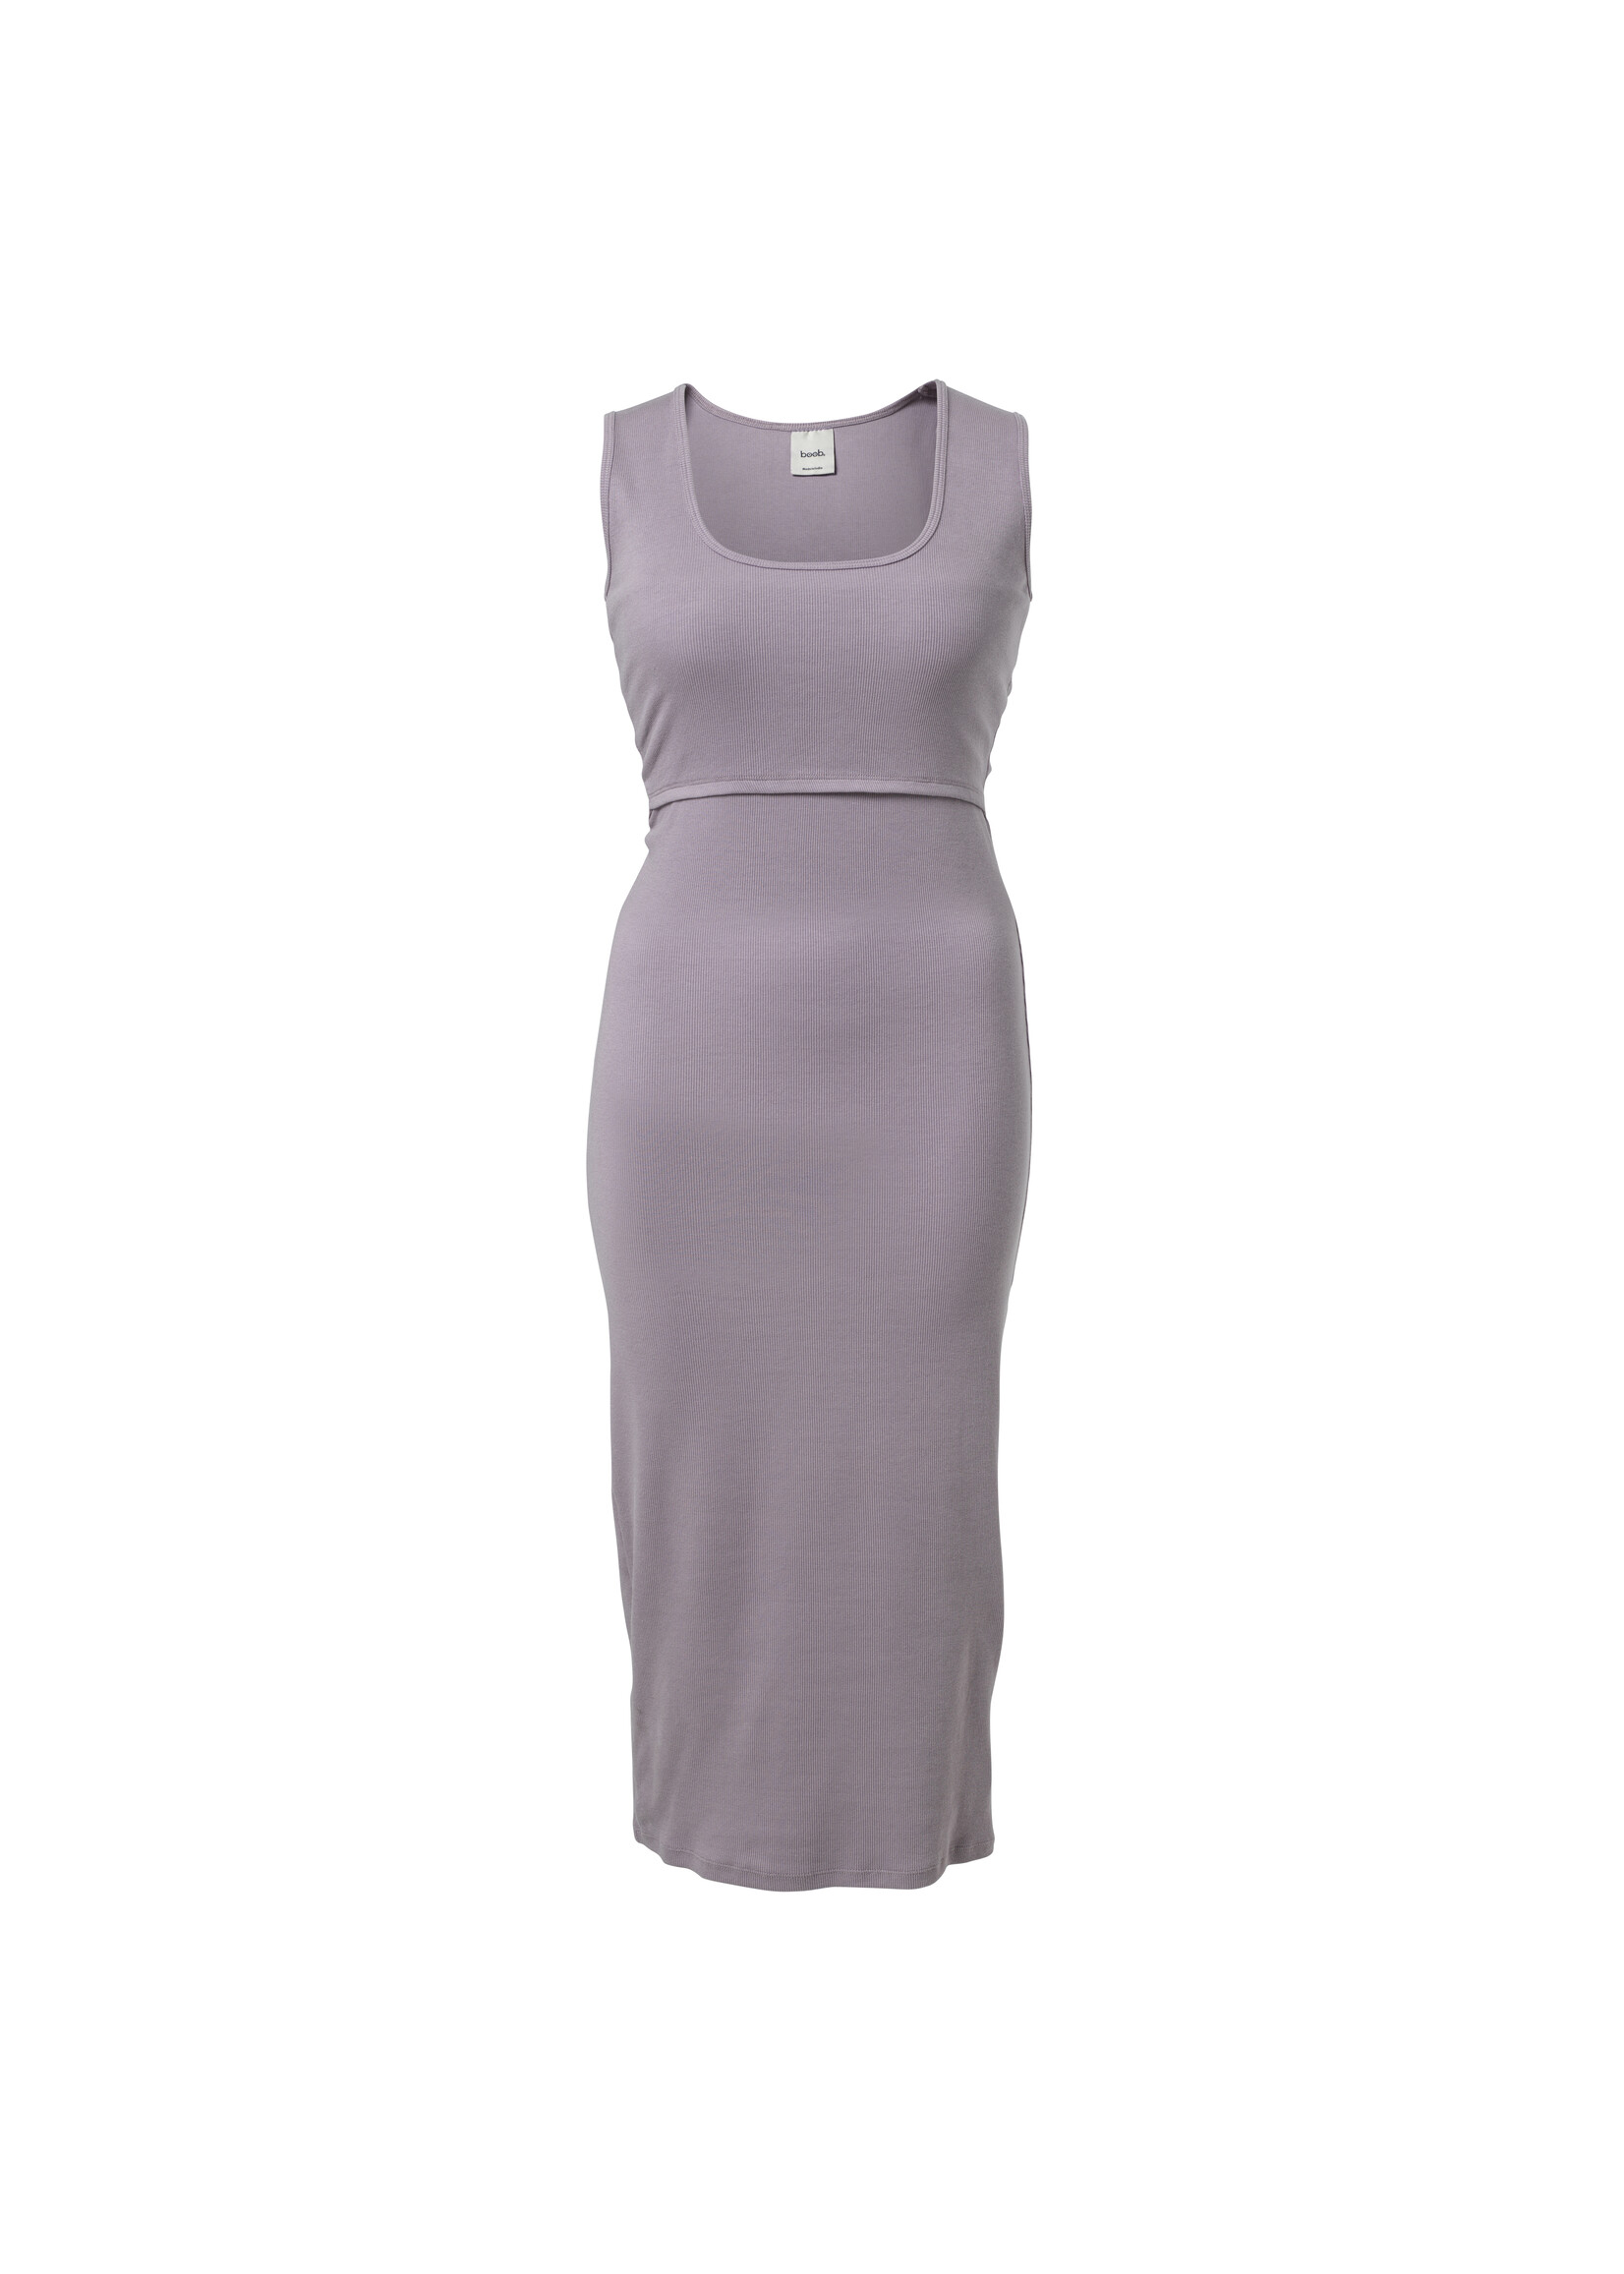 Ribbed maternity tank dress with nursing access